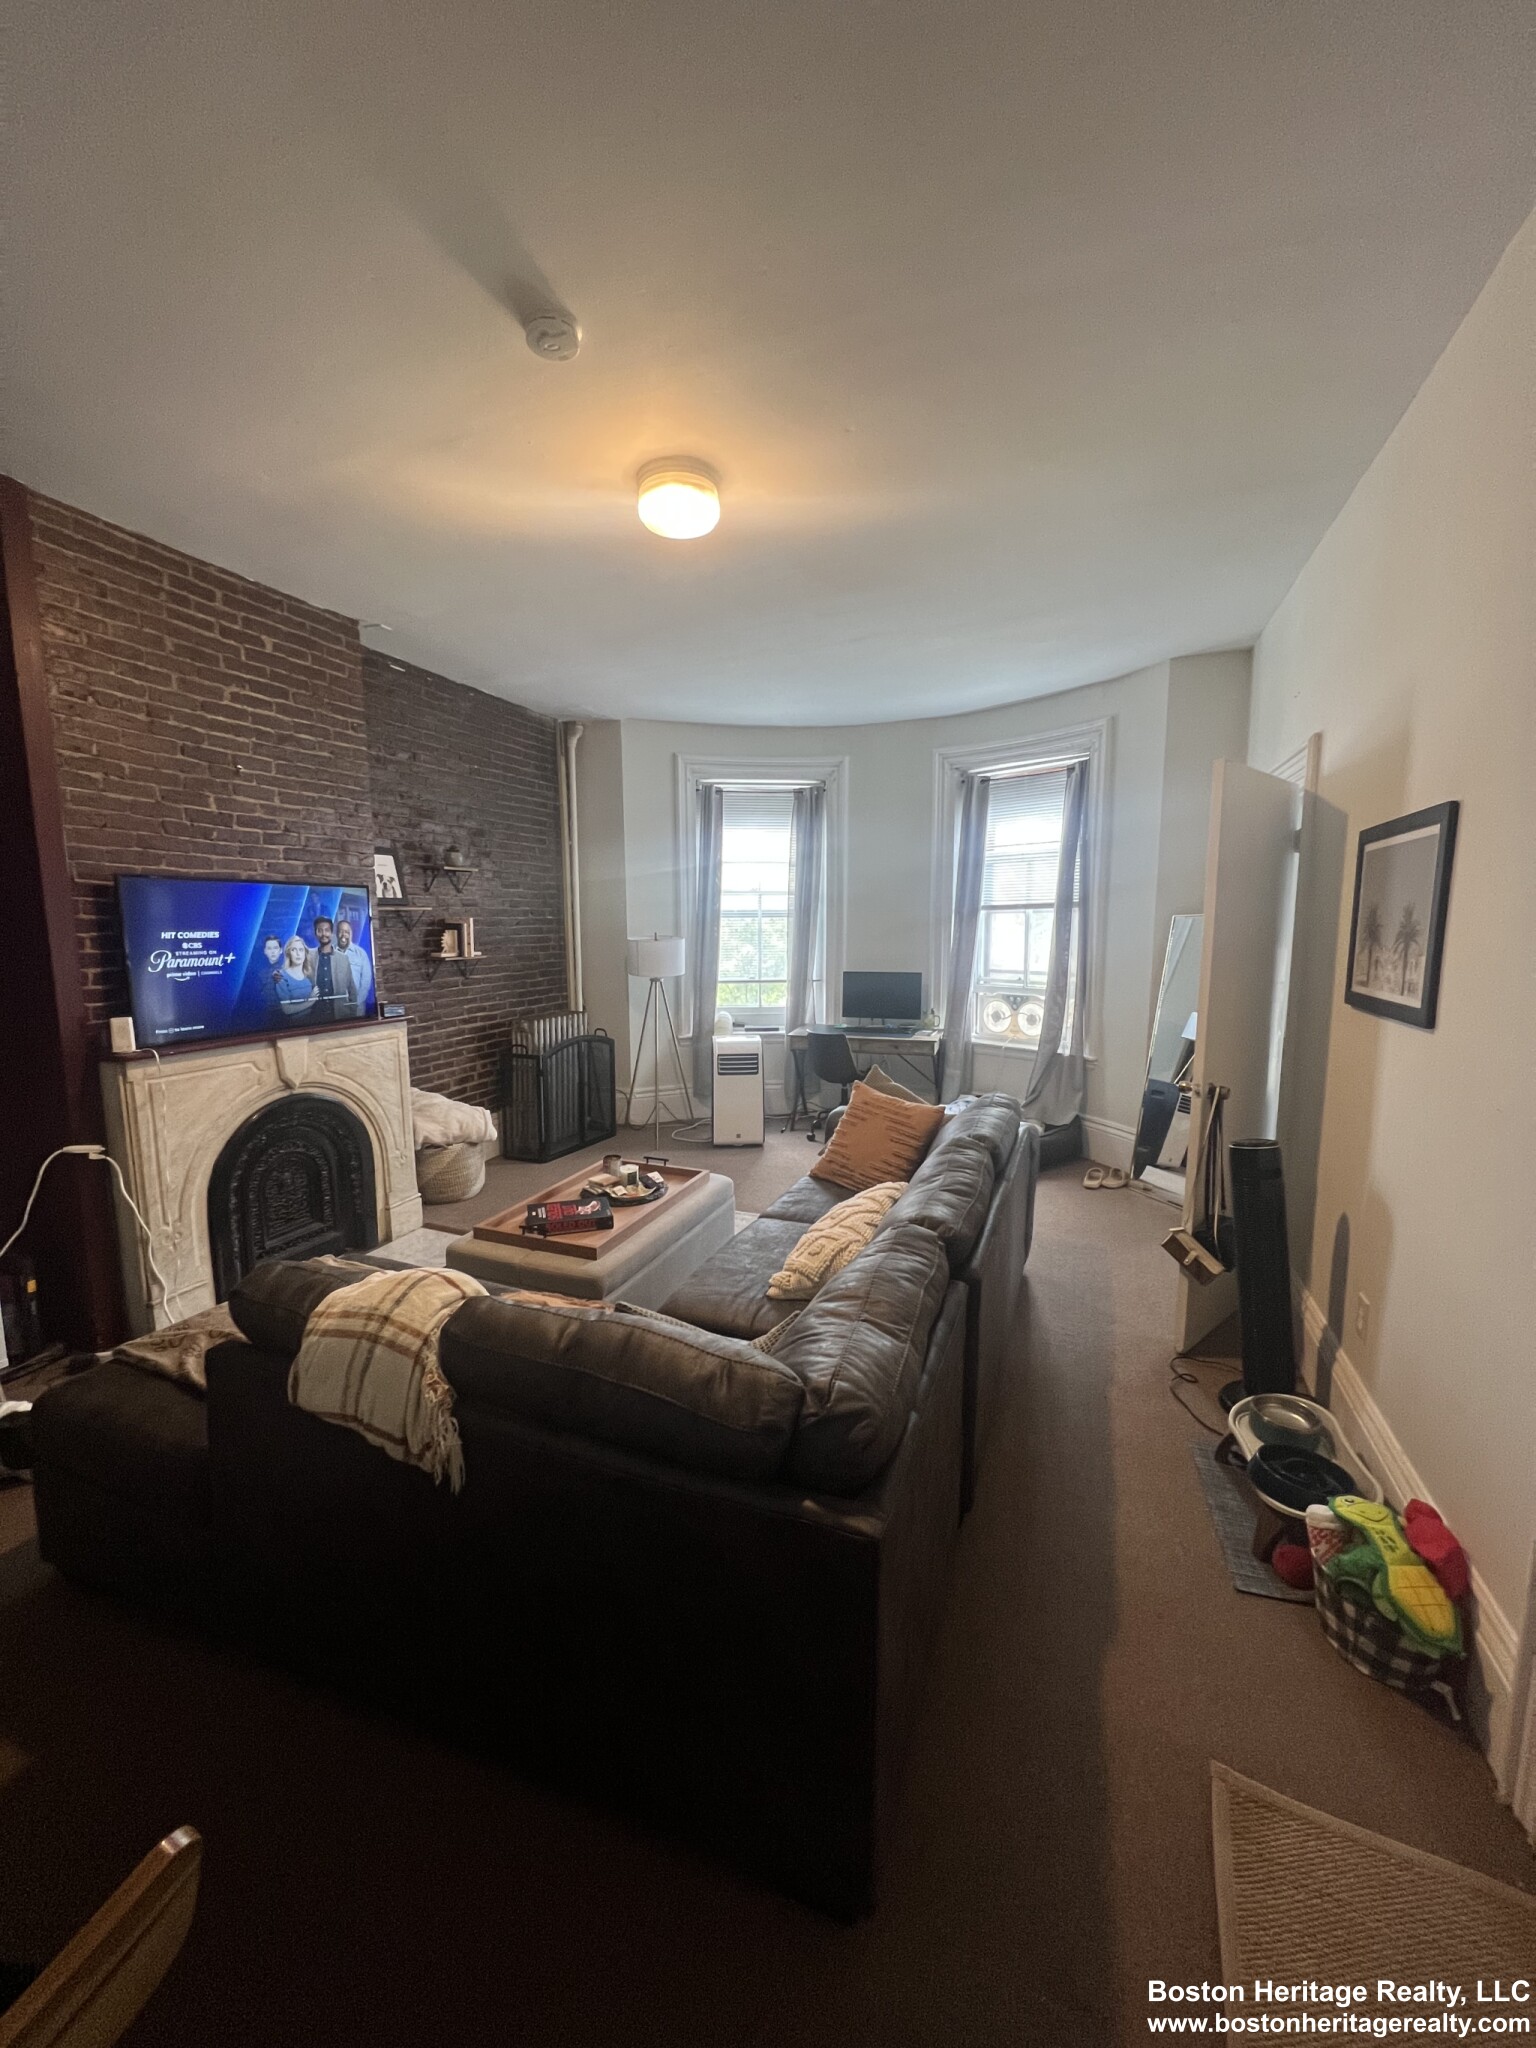 1 Bed, 1 Bath apartment in Boston, South End for $2,450